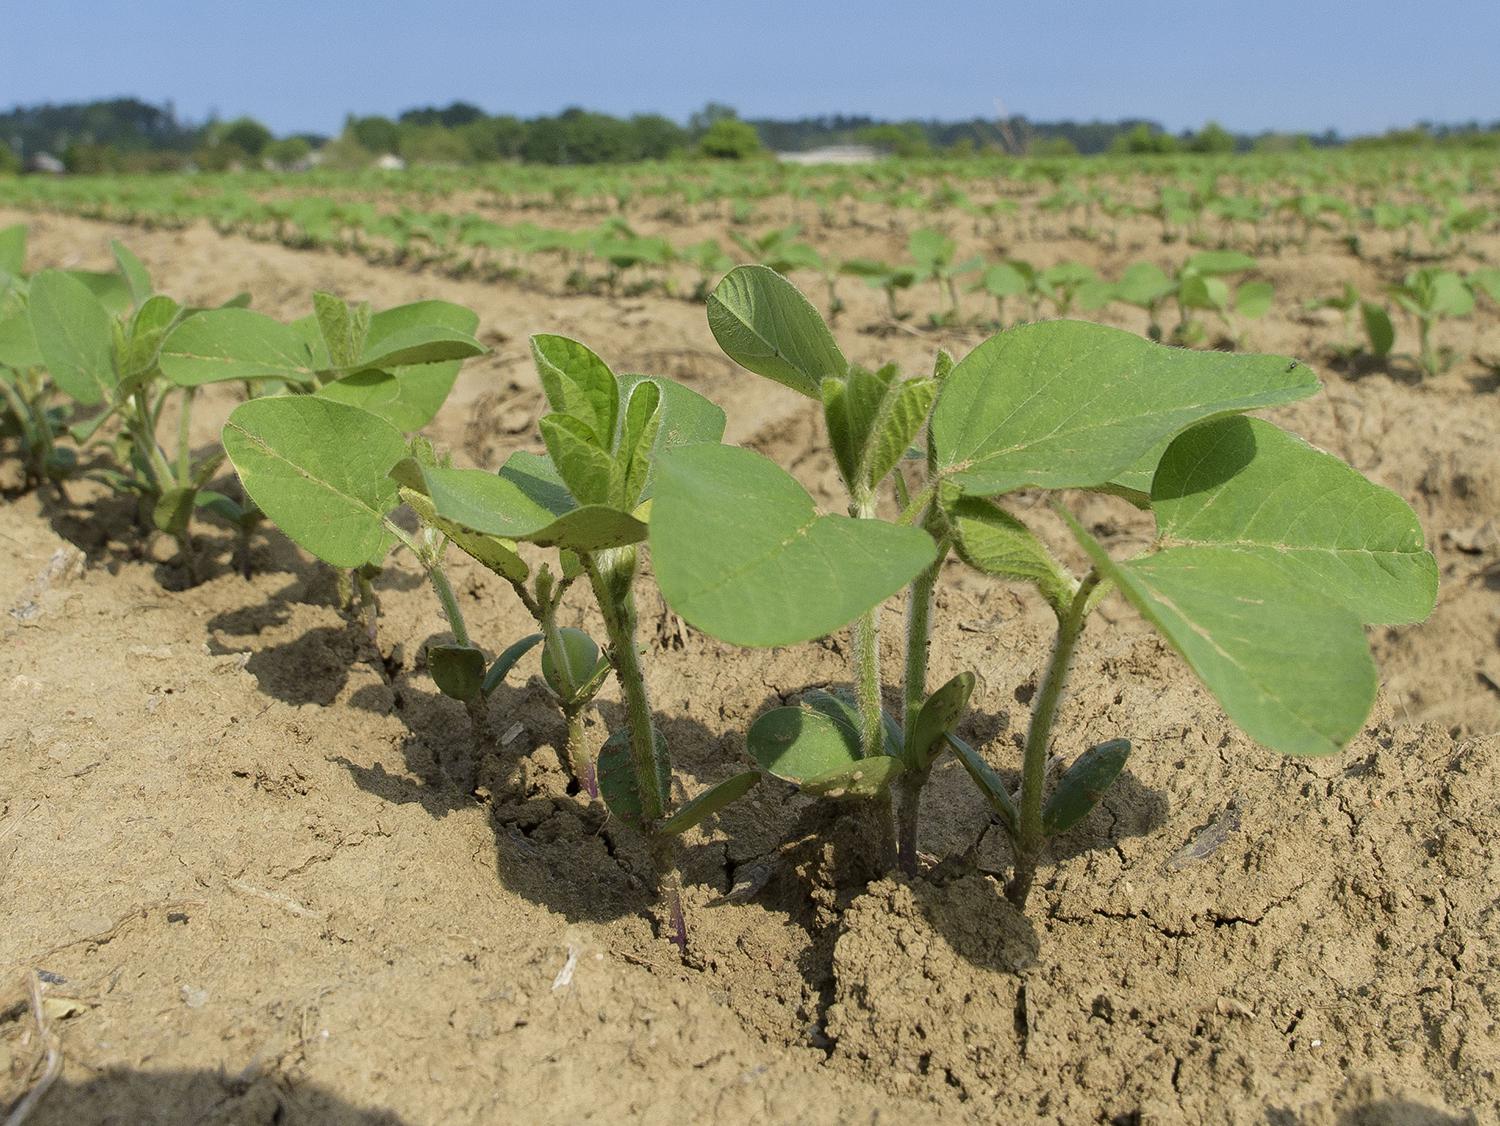  Small soybean plants stand a few inches tall against a blue sky.